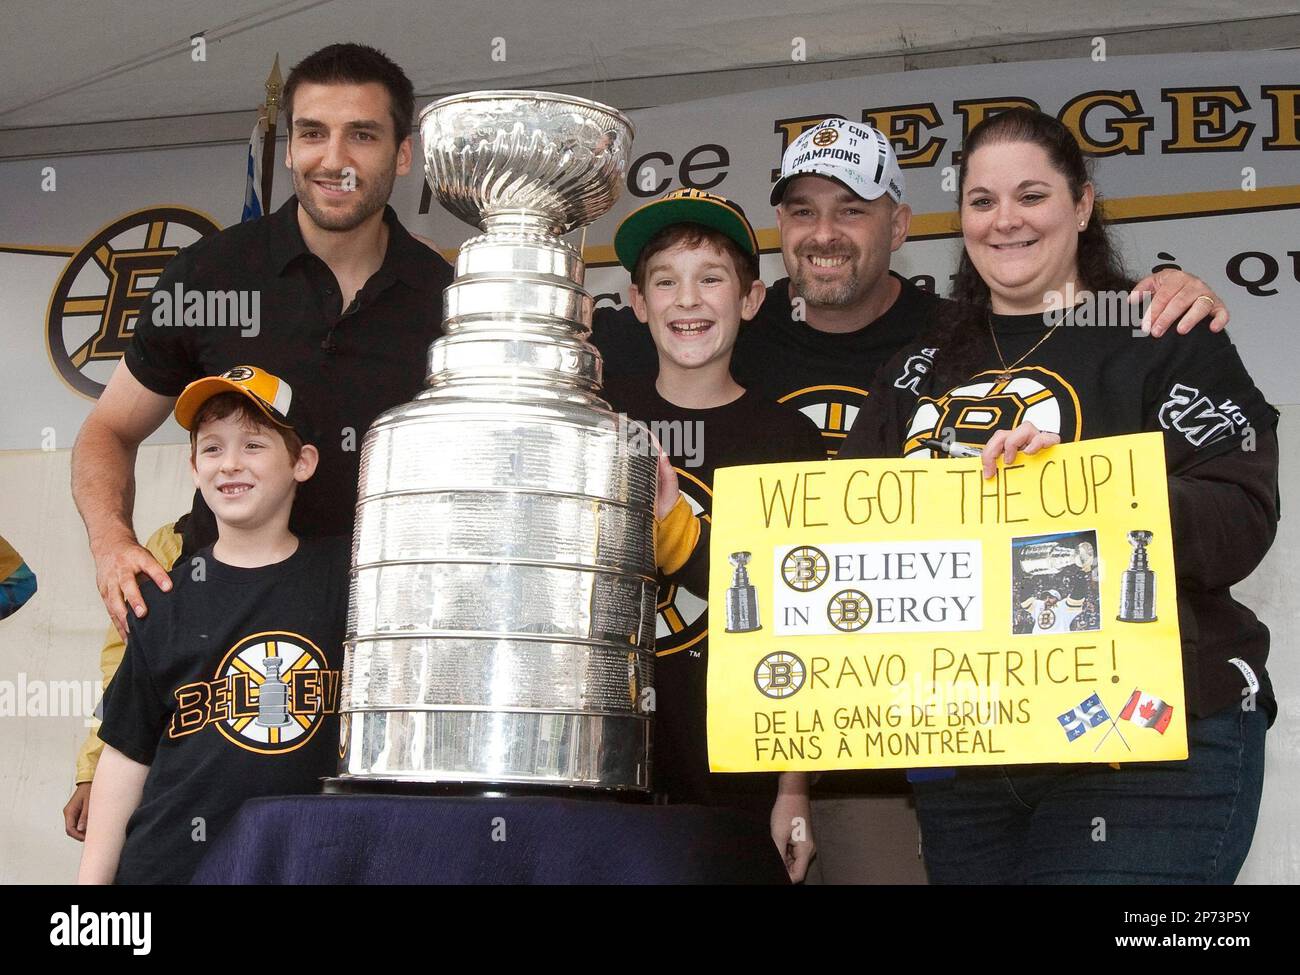 Download The Boston Bruins Team Pose With The Cup